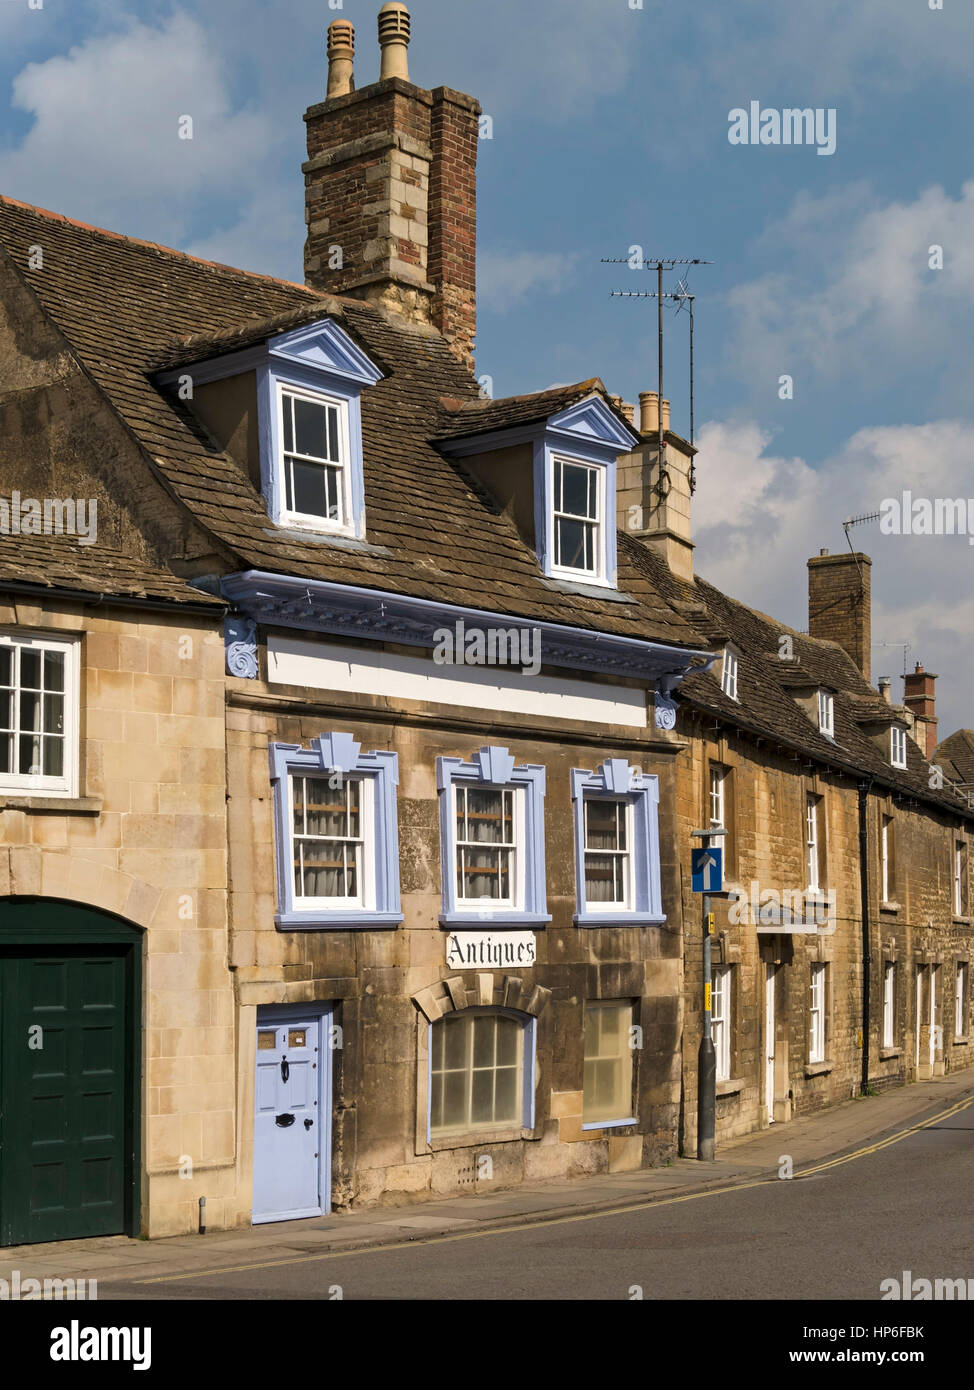 Old Antique shop and cottages, St. George's Square, Stamford, Lincolnshire, England, UK Stock Photo